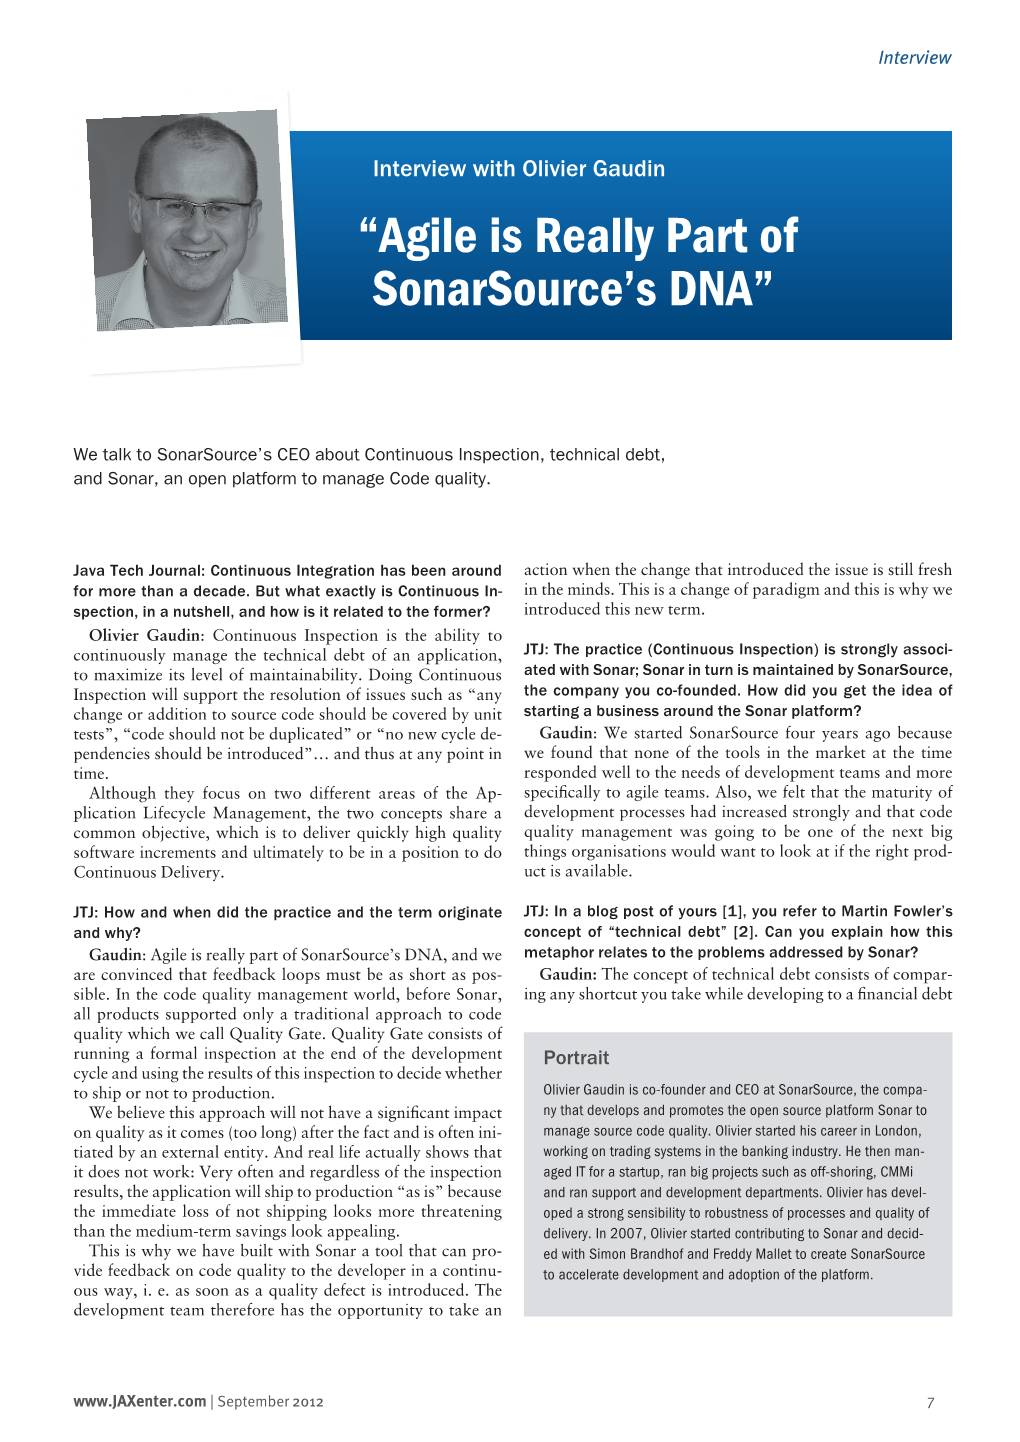 “Agile Is Really Part of Sonarsource's DNA”